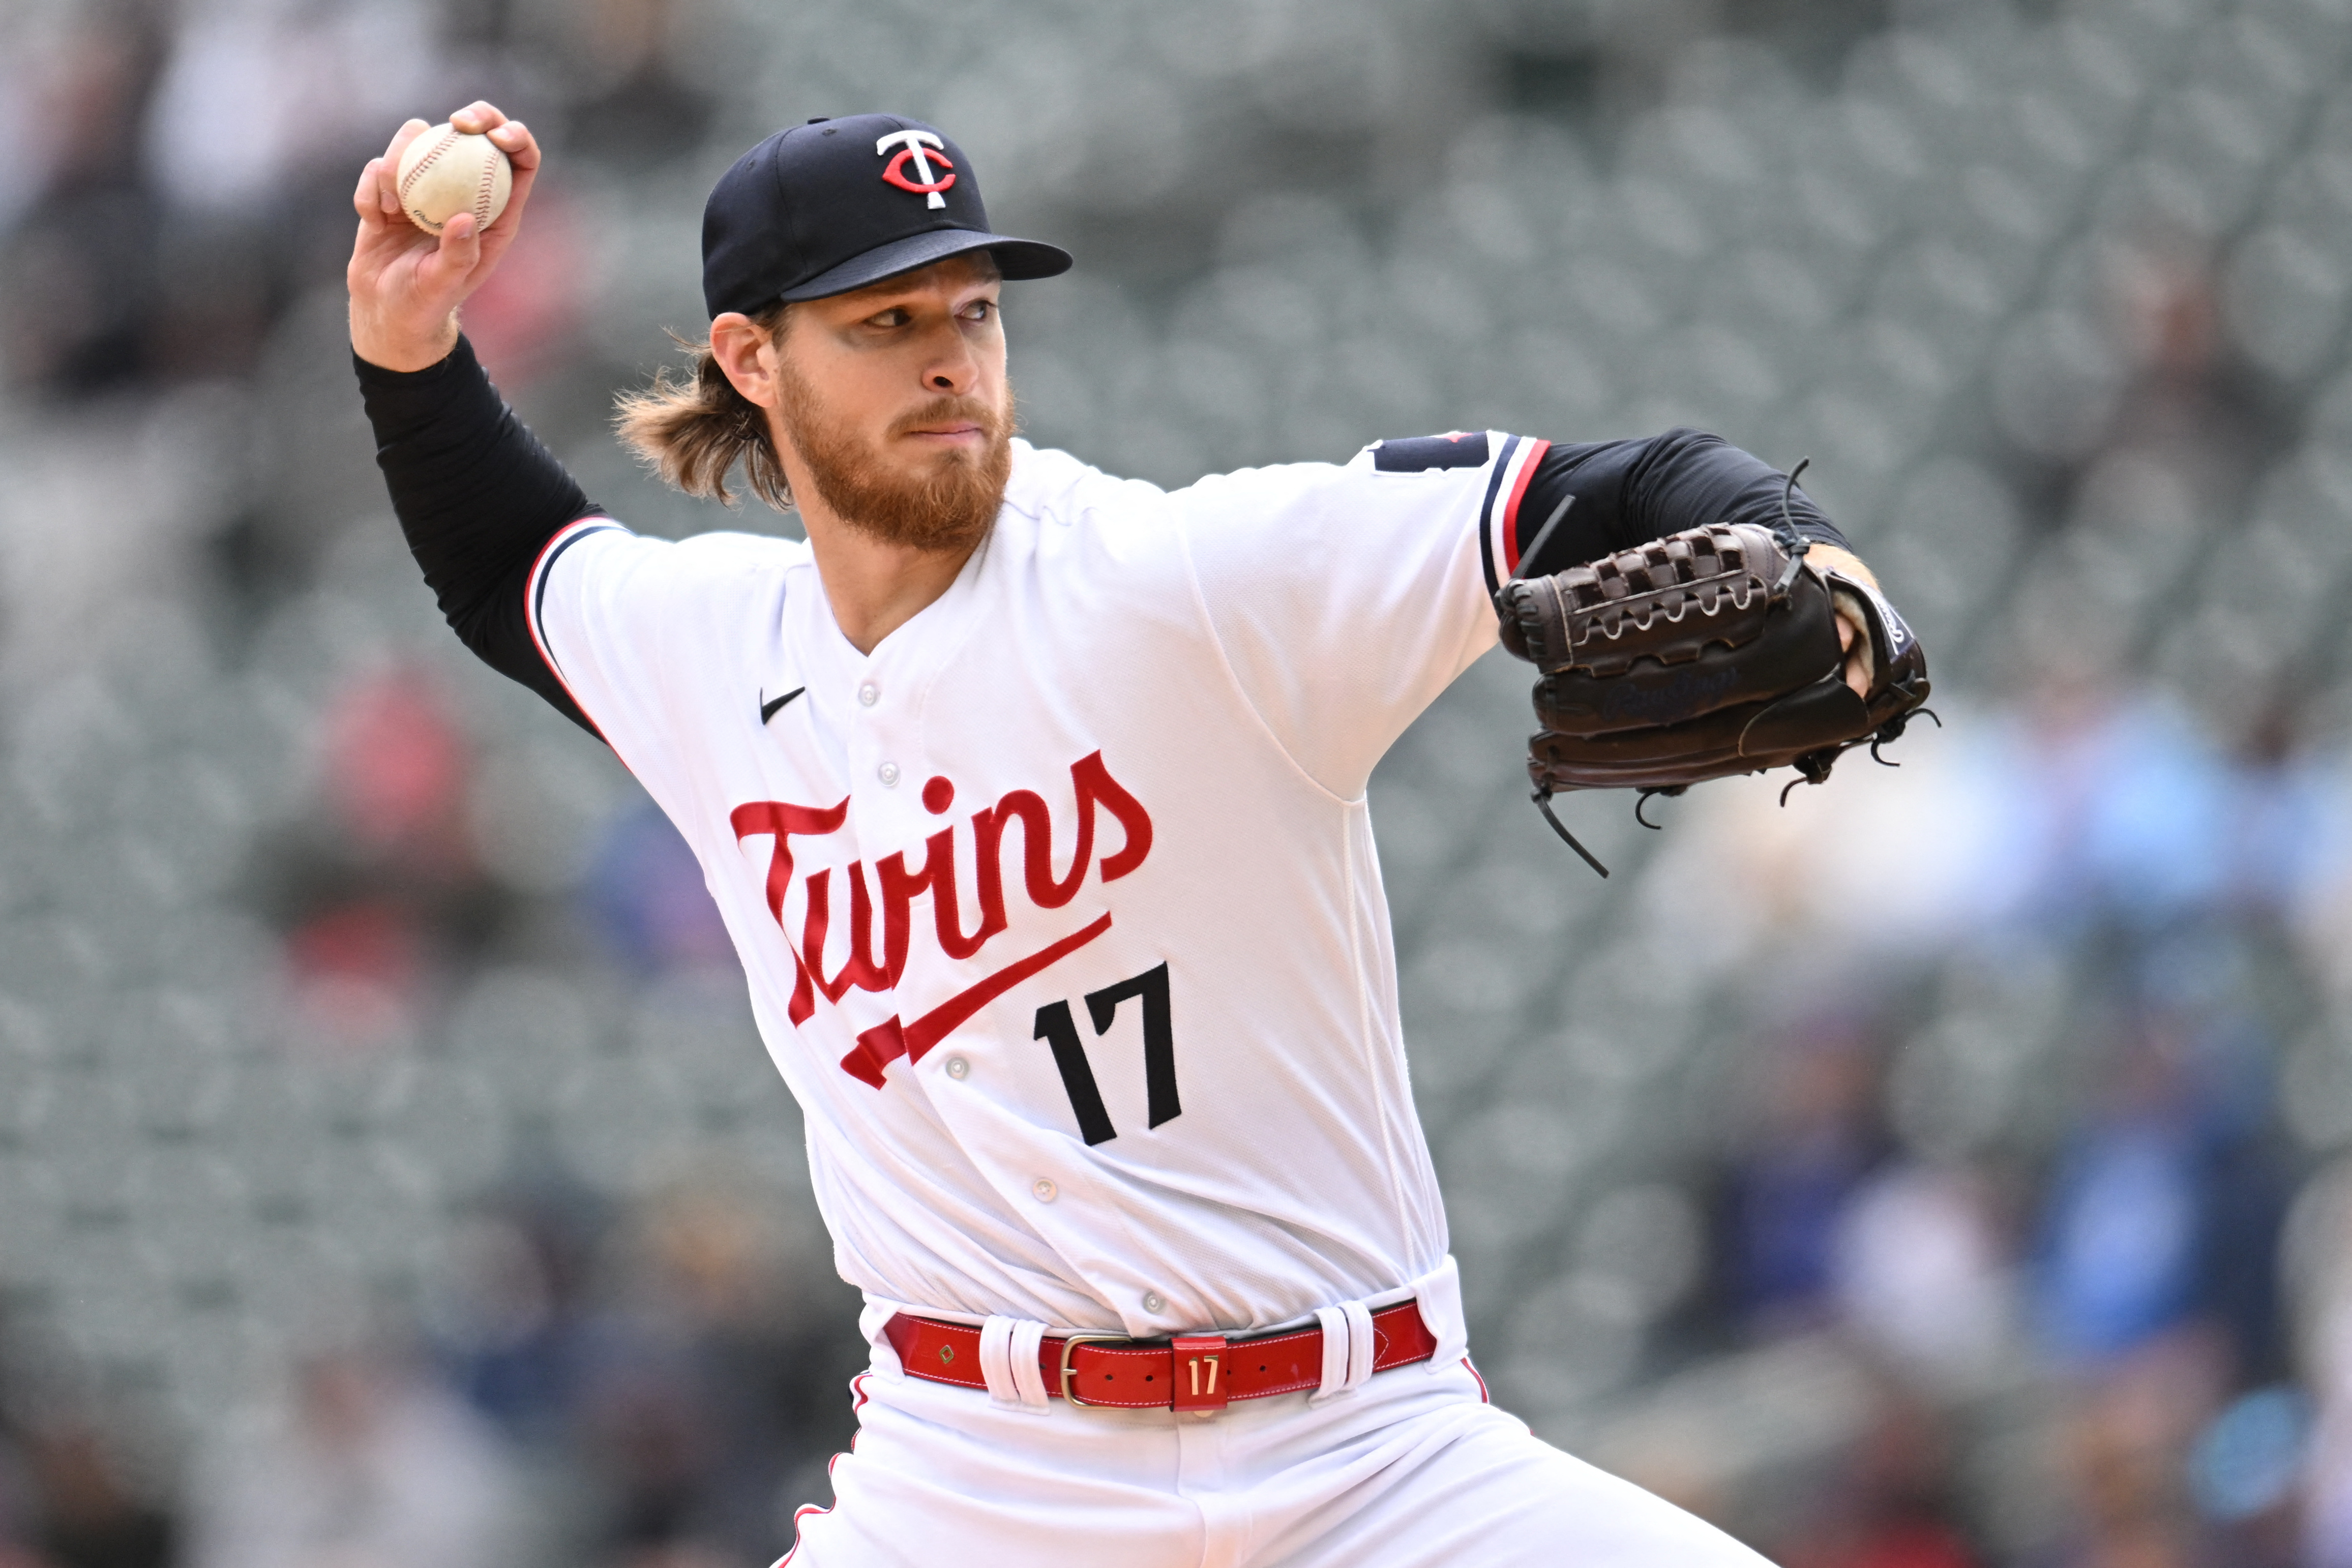 Minnesota Twins: Are the White Sox a credible threat to the Twins?